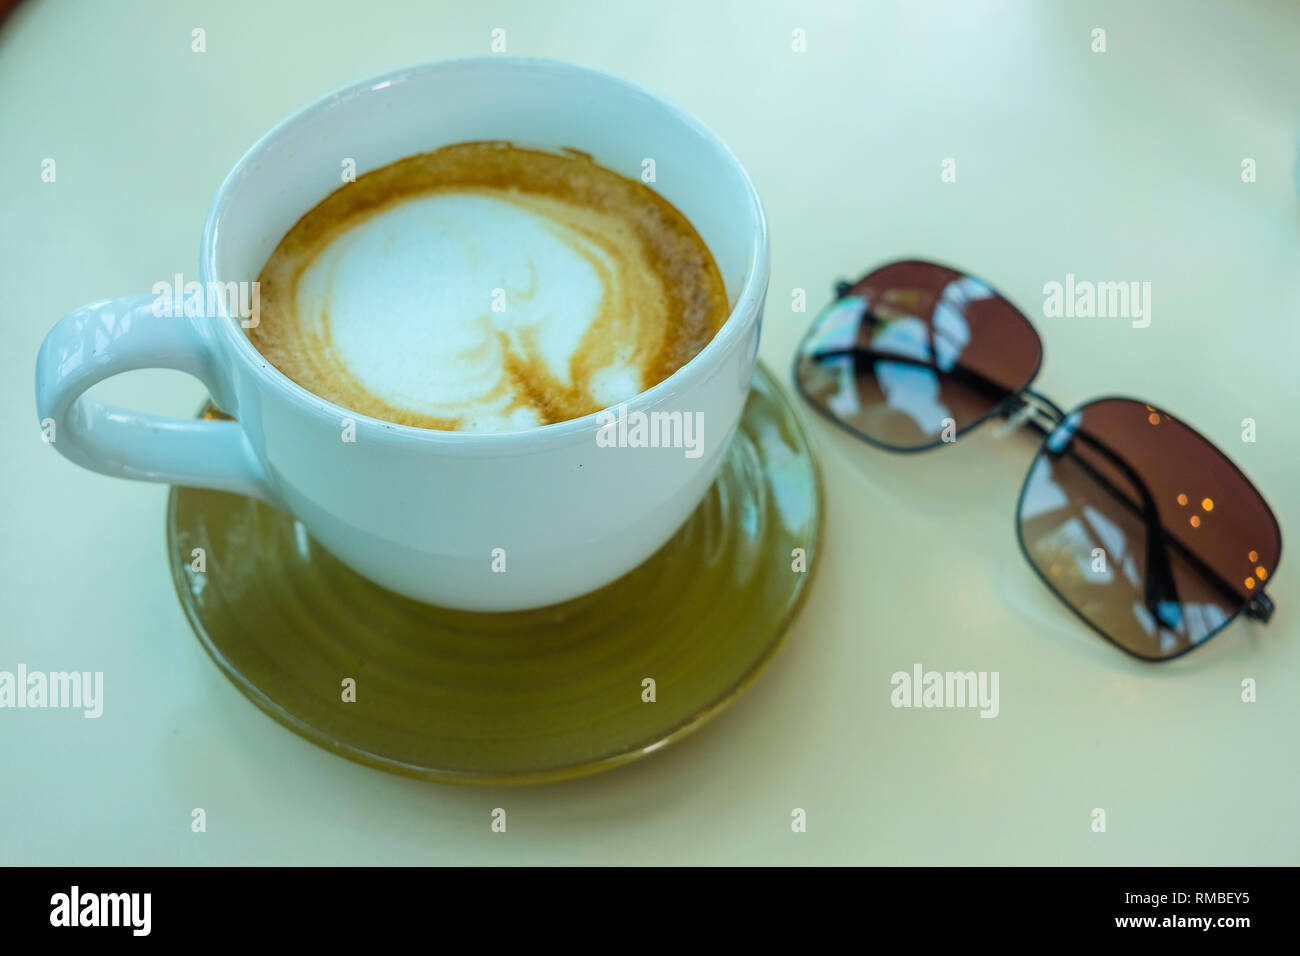 Close up view of office table top with coffee cup and sunglasses Stock Photo